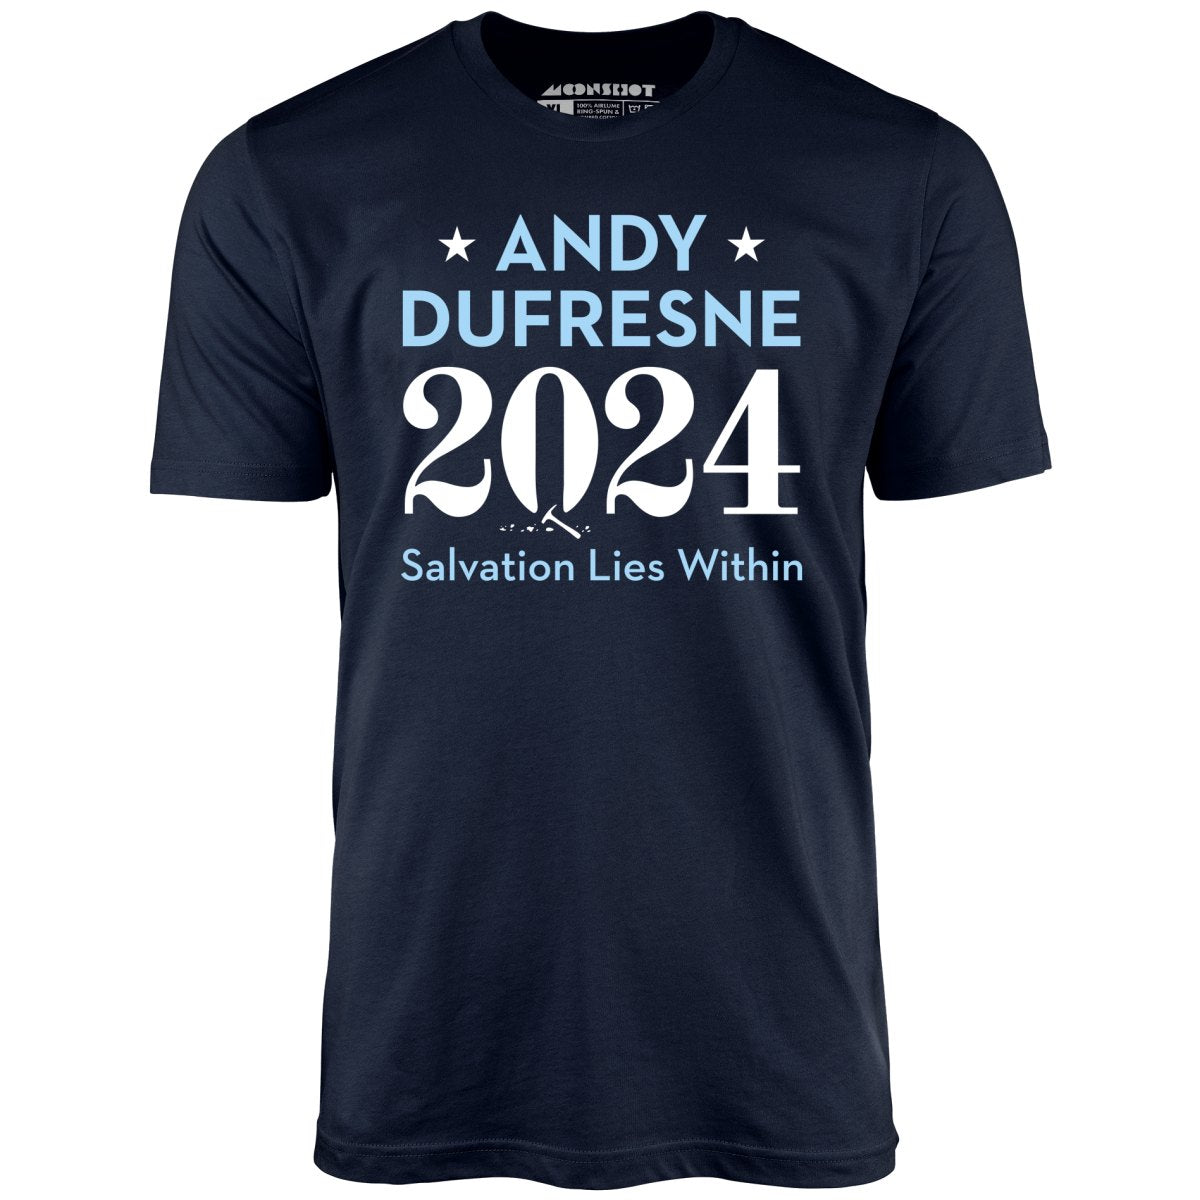 Andy Dufresne 2024 - Unisex T-Shirt